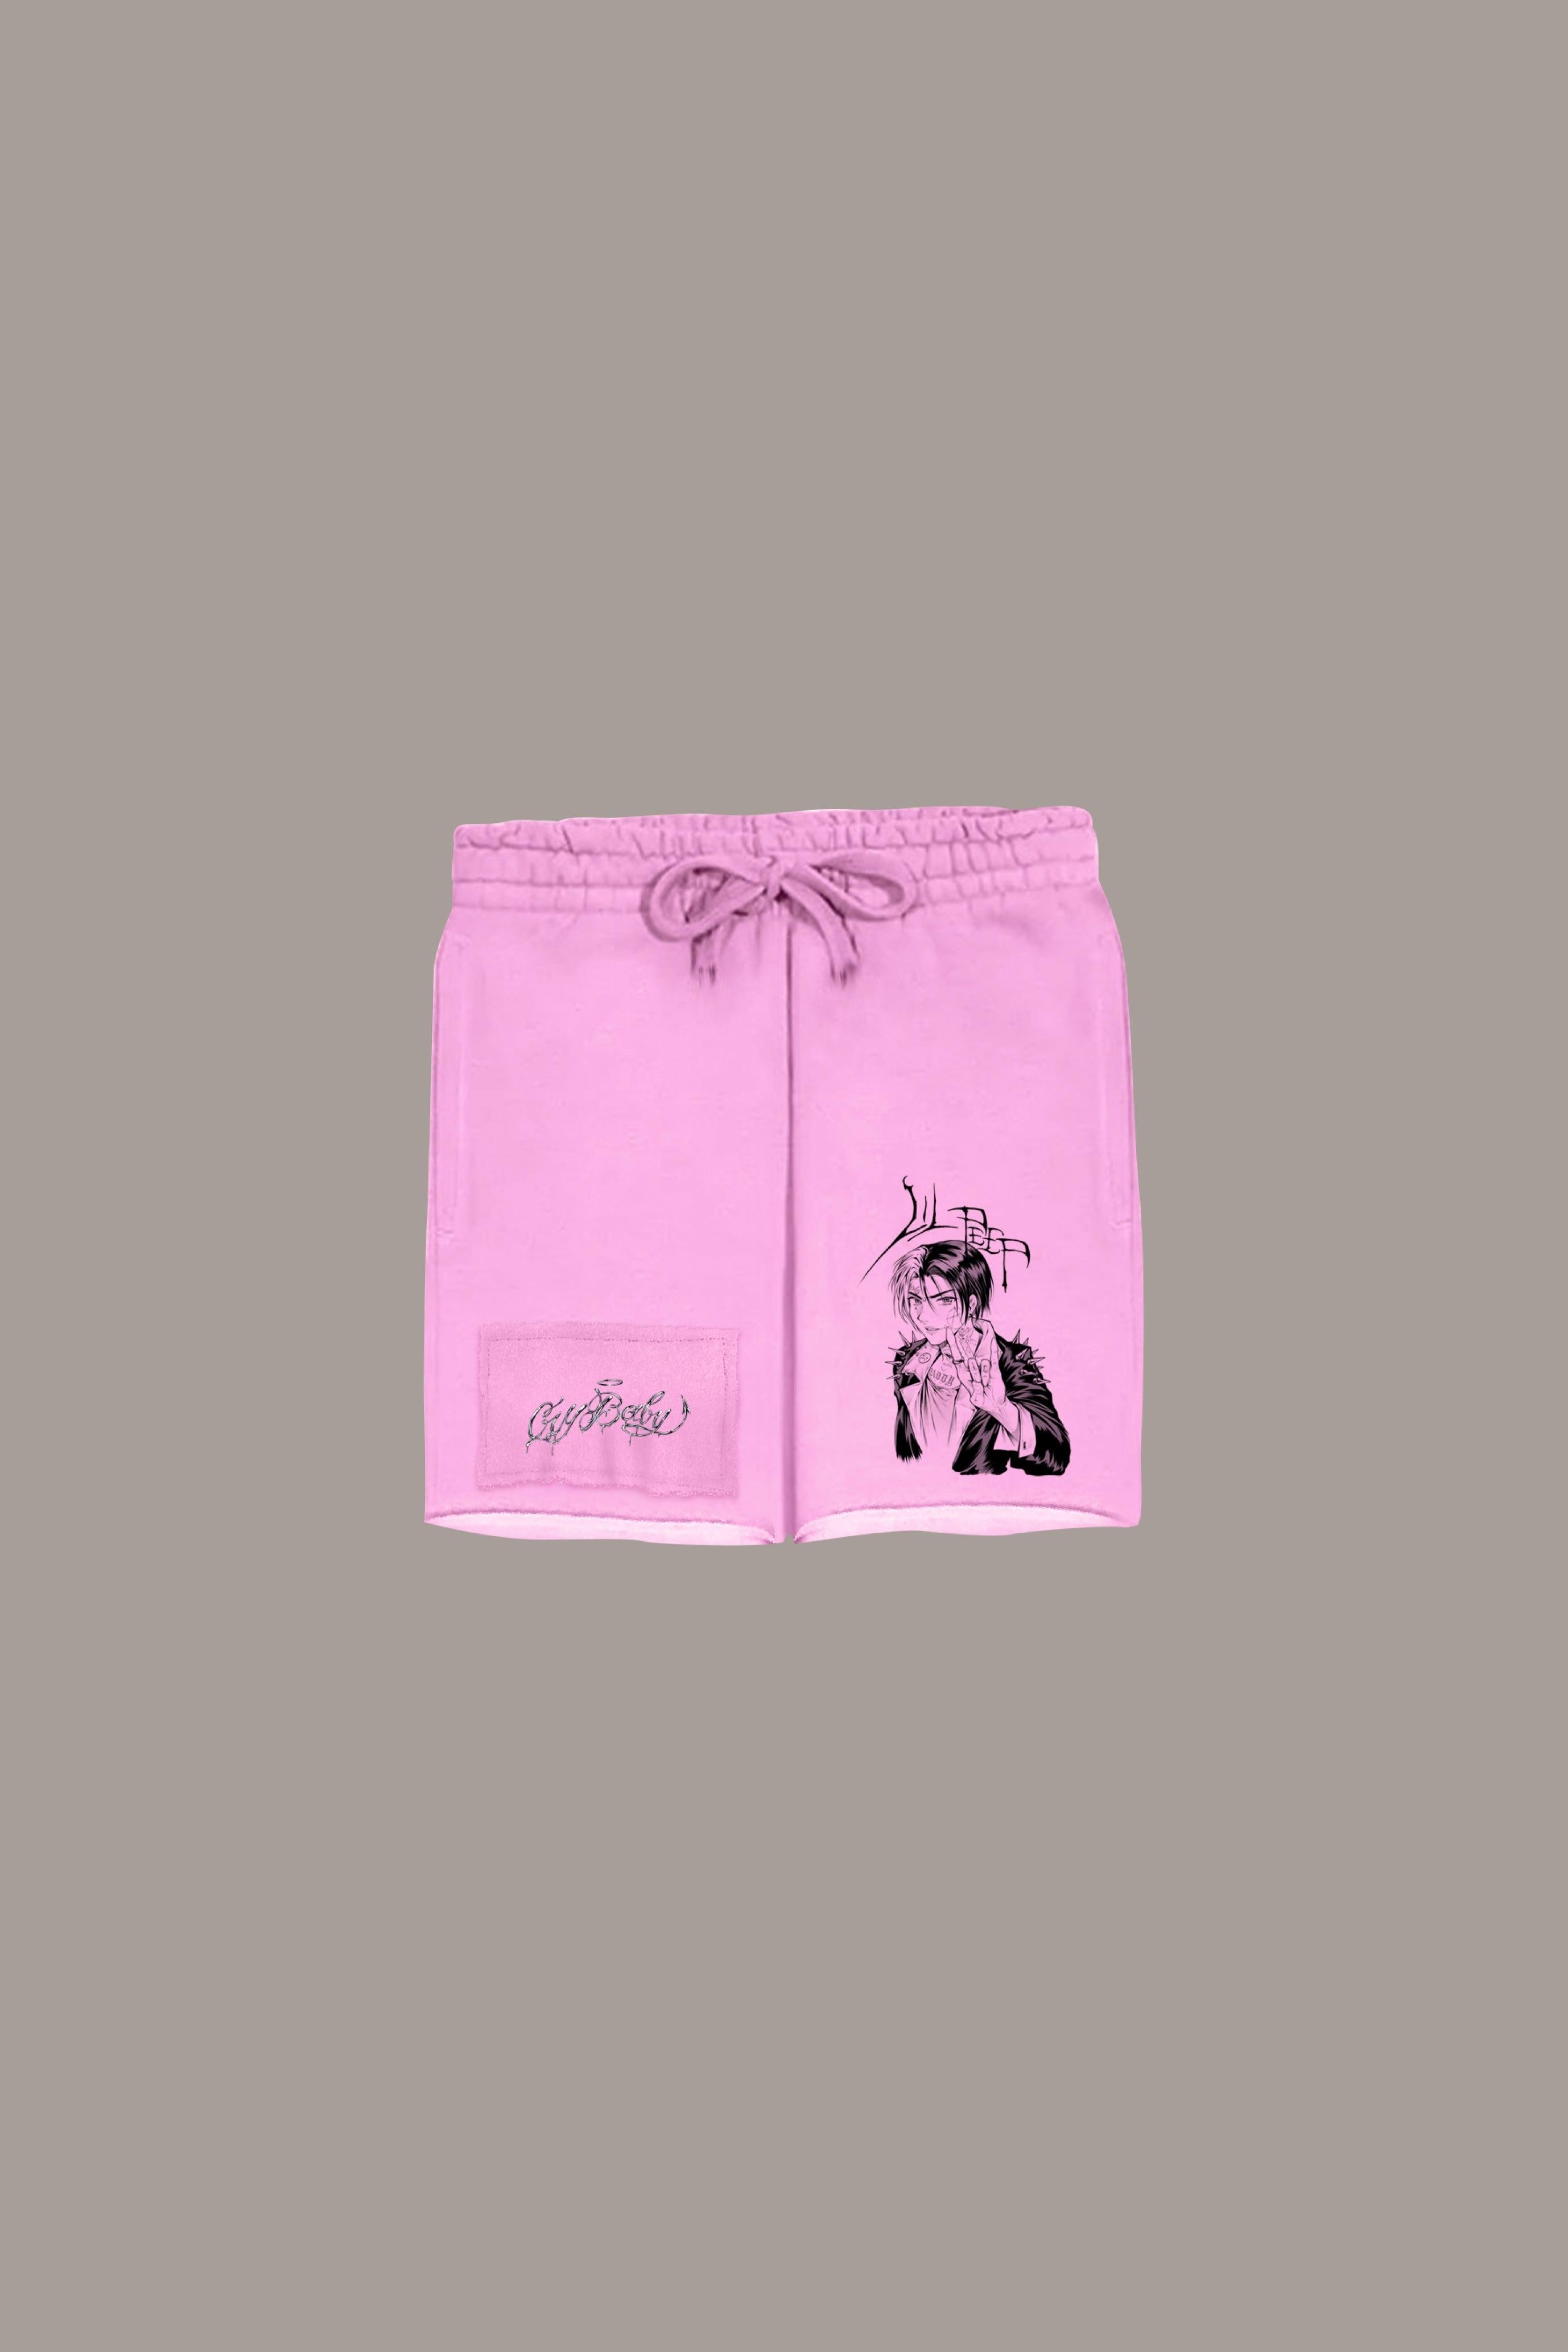 **LIMITED DECONSTRUCTED PATCH SHORTS - **LIMITED DECONSTRUCTED PATCH SHORTS - ROSE IN GOOD FAITH